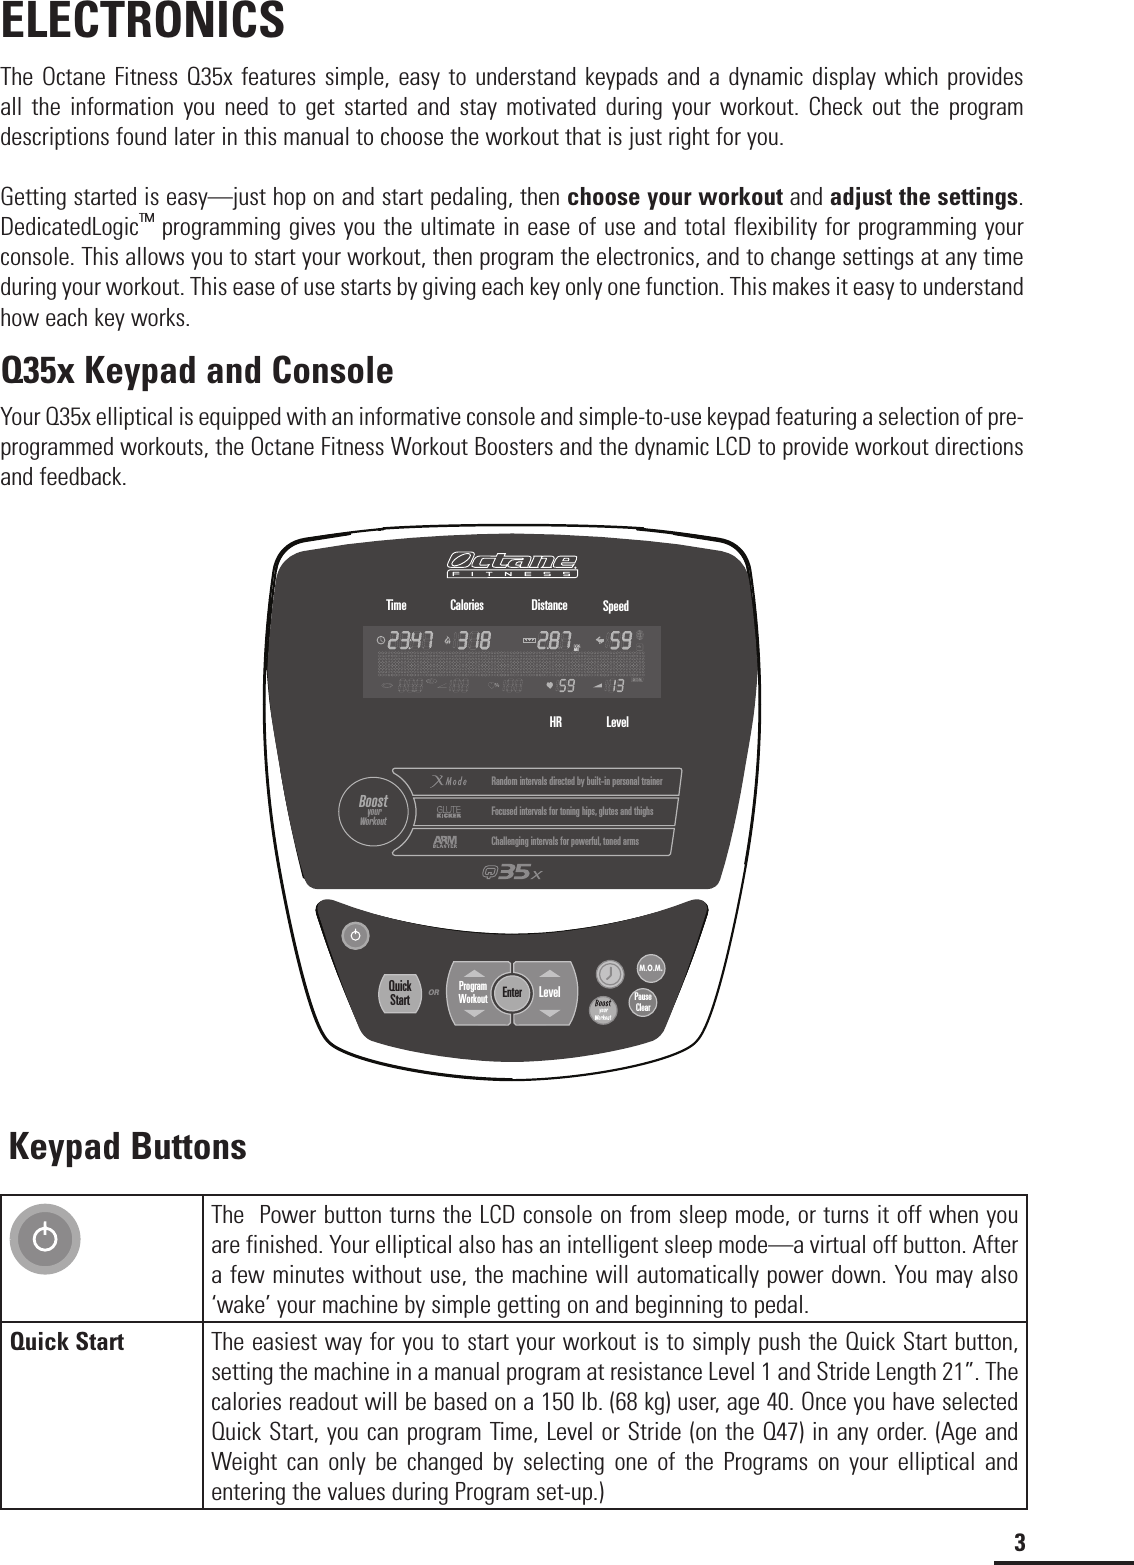 3ELECTRONICSThe Octane Fitness Q35x features simple, easy to understand keypads and a dynamic display which provides all the information you need to get started and stay motivated during your workout. Check out the program descriptions found later in this manual to choose the workout that is just right for you.Getting started is easy—just hop on and start pedaling, then choose your workout and adjust the settings. DedicatedLogic™ programming gives you the ultimate in ease of use and total flexibility for programming your console. This allows you to start your workout, then program the electronics, and to change settings at any time during your workout. This ease of use starts by giving each key only one function. This makes it easy to understand how each key works.Q35x Keypad and ConsoleYour Q35x elliptical is equipped with an informative console and simple-to-use keypad featuring a selection of pre-programmed workouts, the Octane Fitness Workout Boosters and the dynamic LCD to provide workout directions and feedback.EnterProgramWorkout LevelOR PauseClearM.O.M.Quick Start Time Calories SpeedDistanceHR LevelChallenging intervals for powerful, toned armsFocused intervals for toning hips, glutes and thighsRandom intervals directed by built-in personal trainerBoost yourWorkoutKeypad ButtonsThe  Power button turns the LCD console on from sleep mode, or turns it off when you are finished. Your elliptical also has an intelligent sleep mode—a virtual off button. After a few minutes without use, the machine will automatically power down. You may also ‘wake’ your machine by simple getting on and beginning to pedal.Quick Start The easiest way for you to start your workout is to simply push the Quick Start button, setting the machine in a manual program at resistance Level 1 and Stride Length 21”. The  calories readout will be based on a 150 lb. (68 kg) user, age 40. Once you have selected Quick Start, you can program Time, Level or Stride (on the Q47) in any order. (Age and Weight can only be changed by selecting one of the Programs on your elliptical and entering the values during Program set-up.)